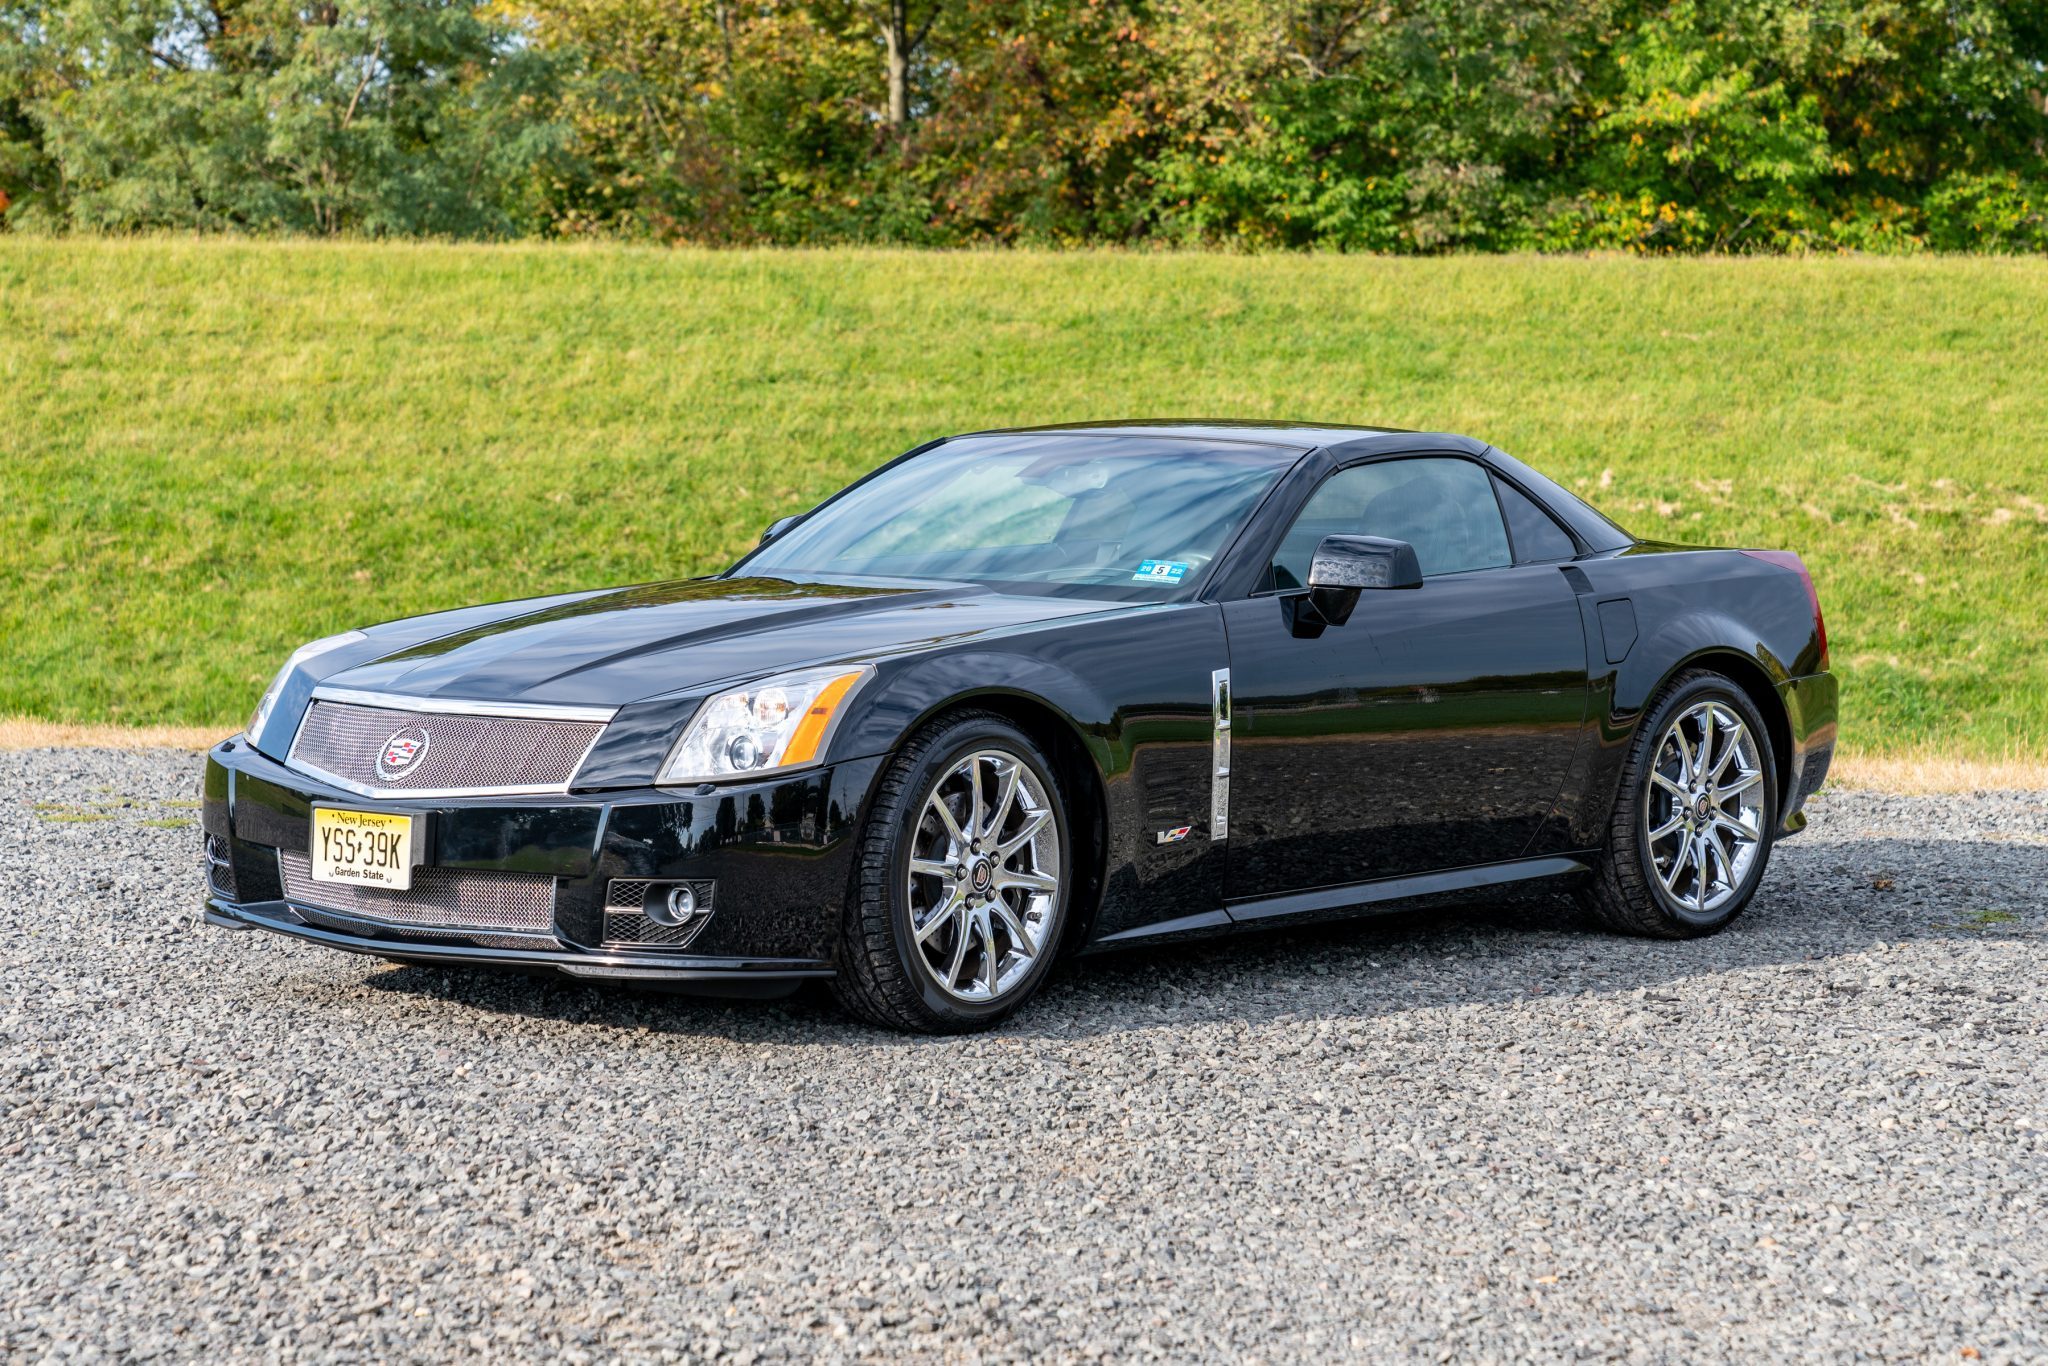 Bring a Trailer] 2009 Cadillac XLR-V For Sale With Only 2,500 Miles